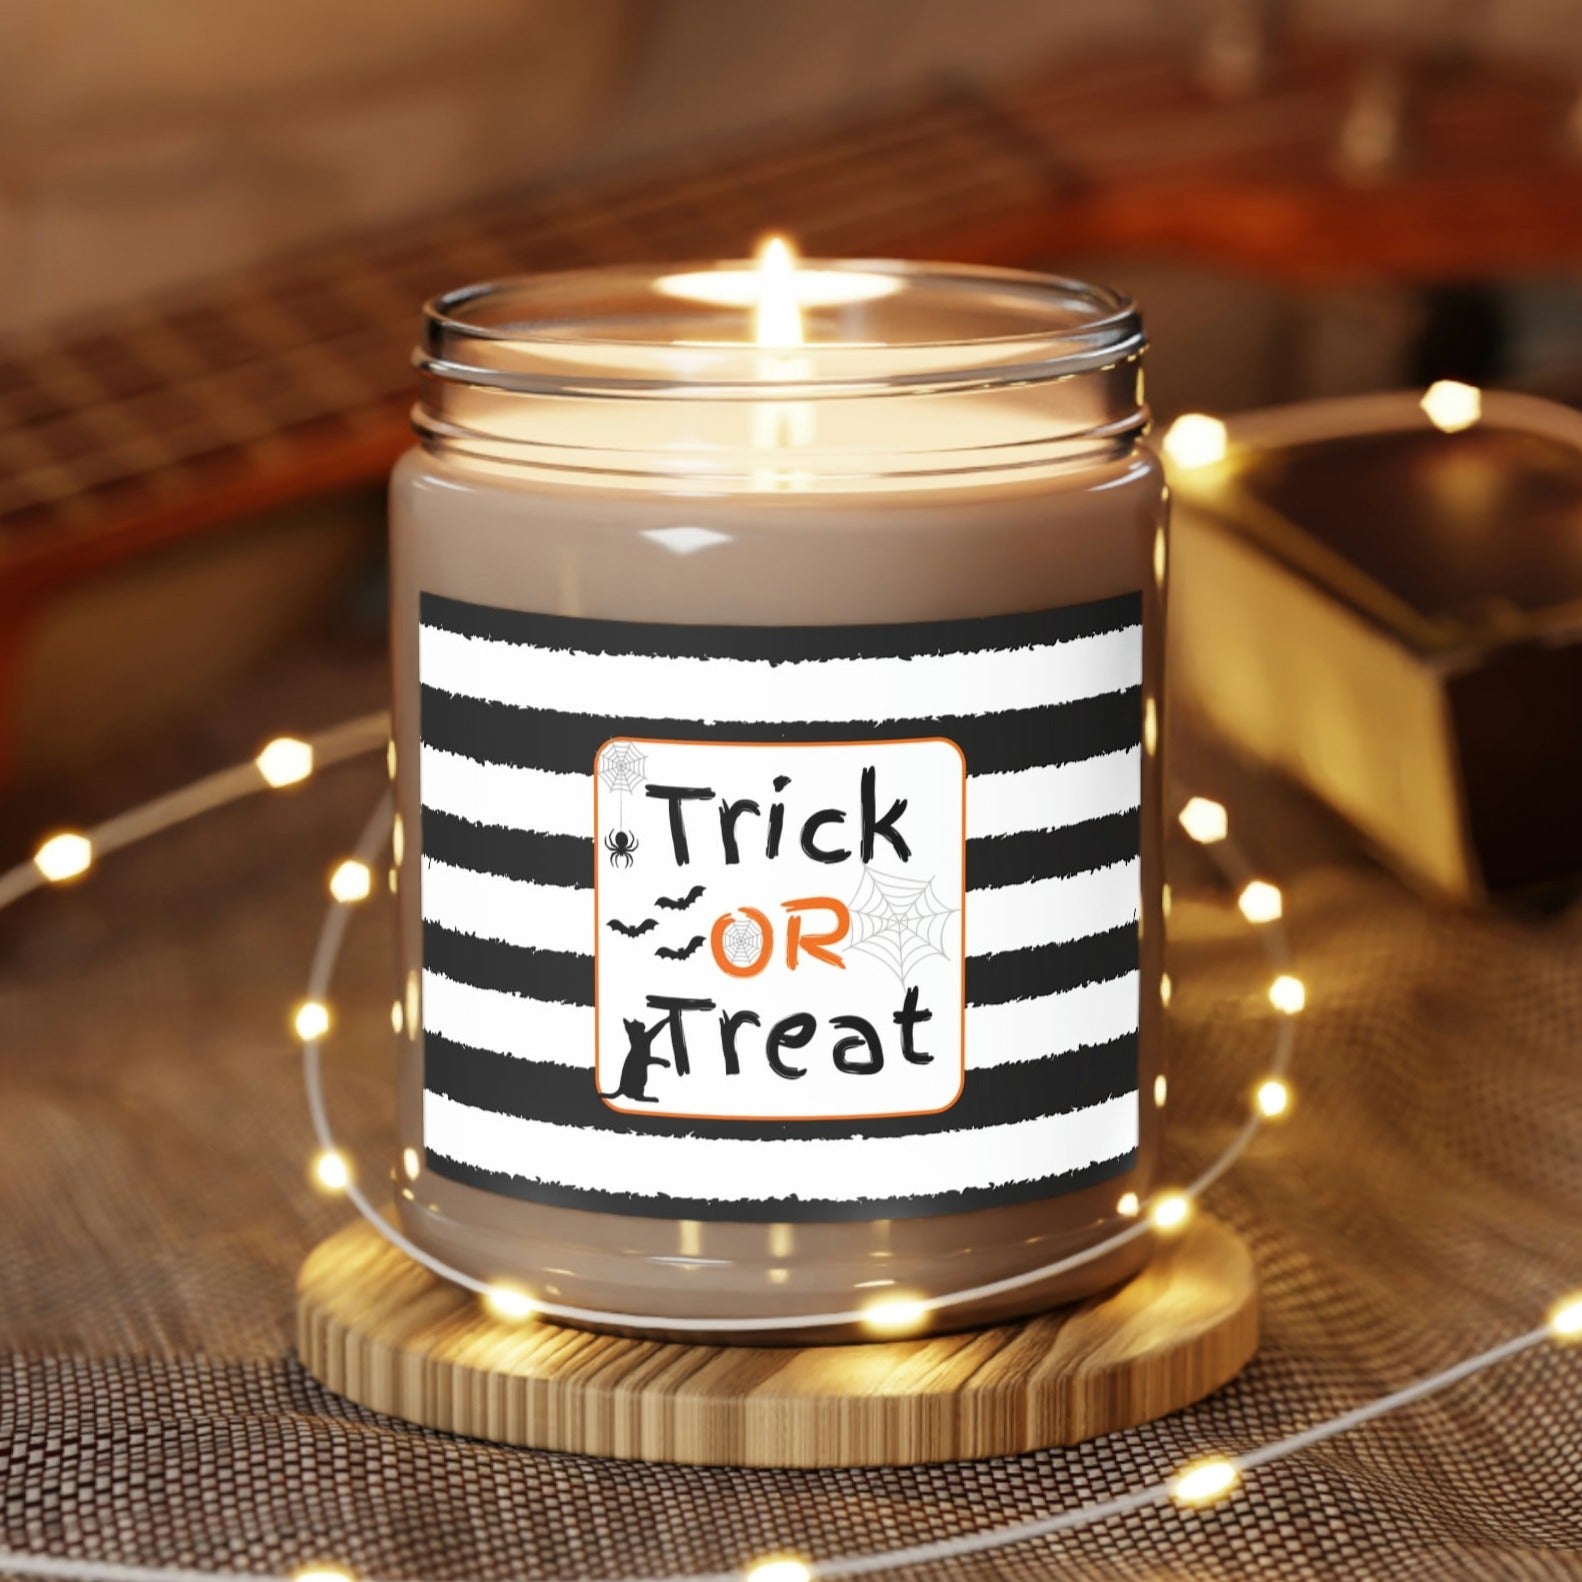 Trick or Treat Candle, Comfort Spice, Eco-Friendly Soy Wax 9oz wrapped in lights on table coaster